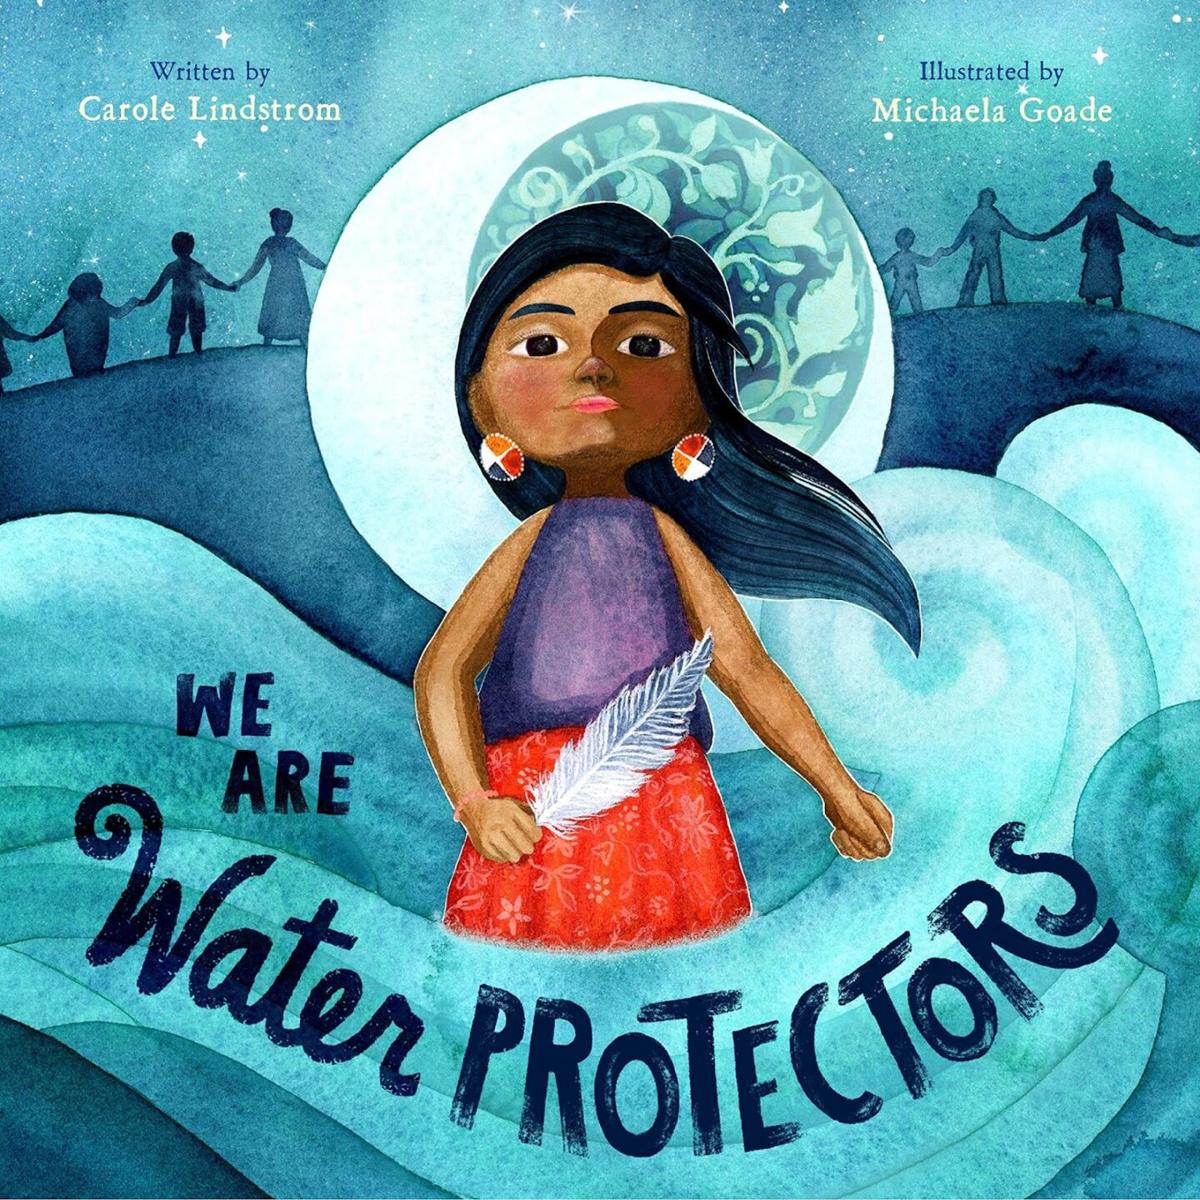 "We are Water Protectors" by Carole Lindstrom; illustrated by Michaela Goade.